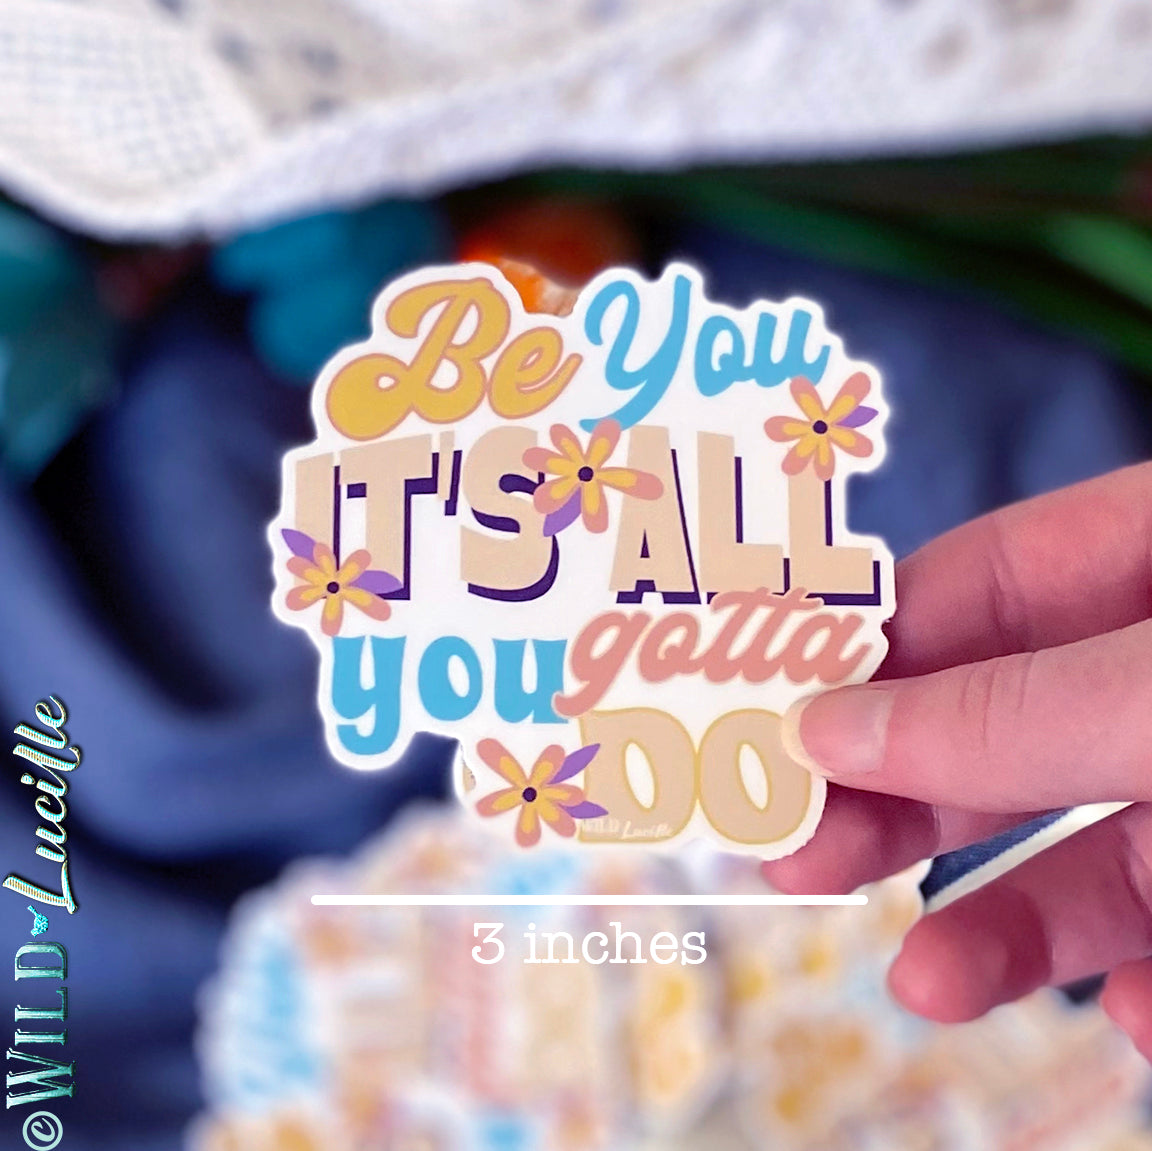 Be You It's All You Gotta Do - Vinyl Sticker Decals